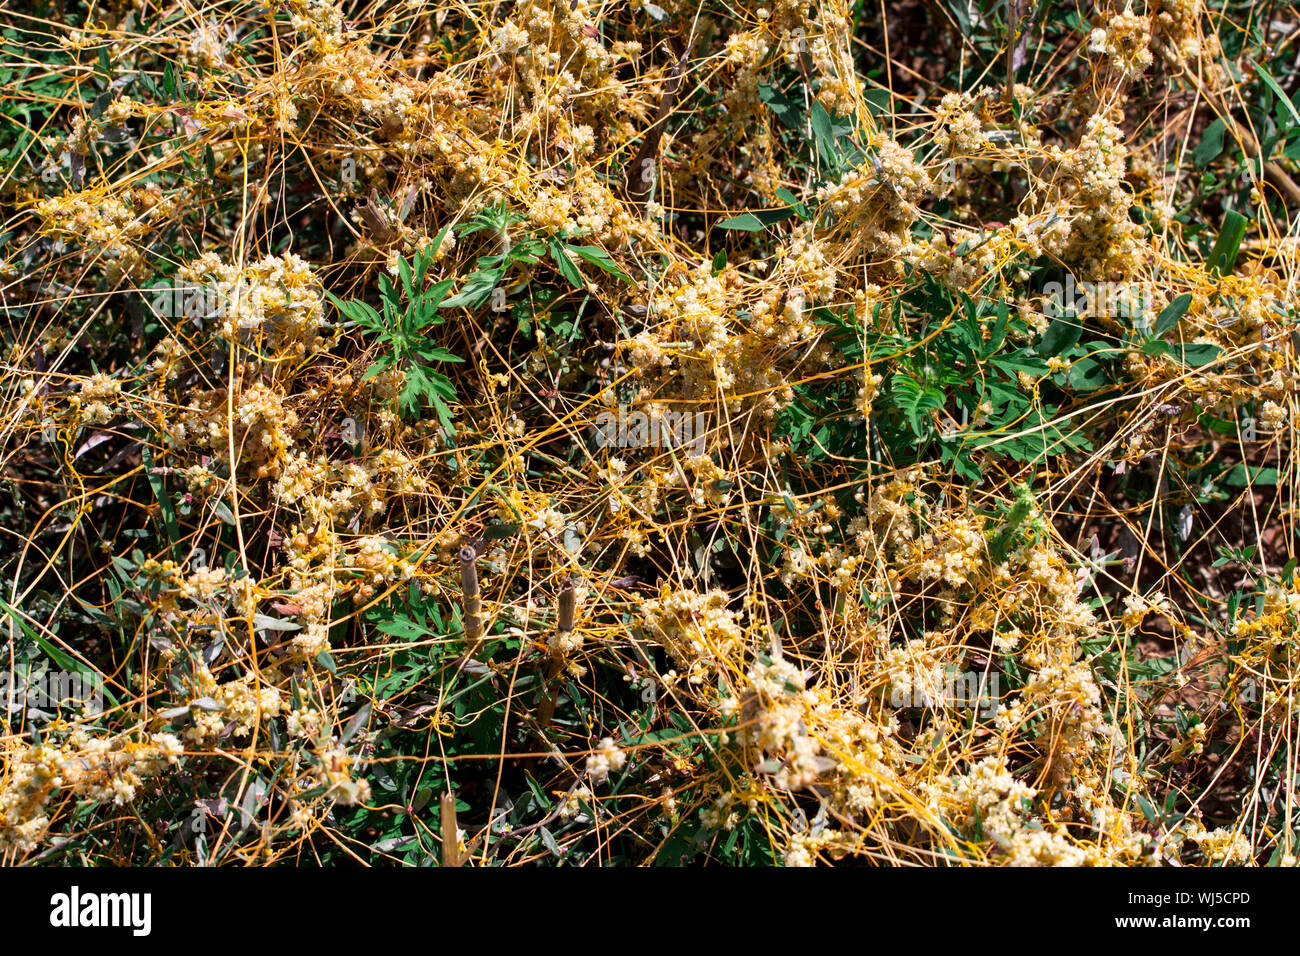 Dodder Genus Cuscuta is The parasite wraps the stems of plant cultures with yellow threads and sucks out the vital juice and nutrients Stock Photo